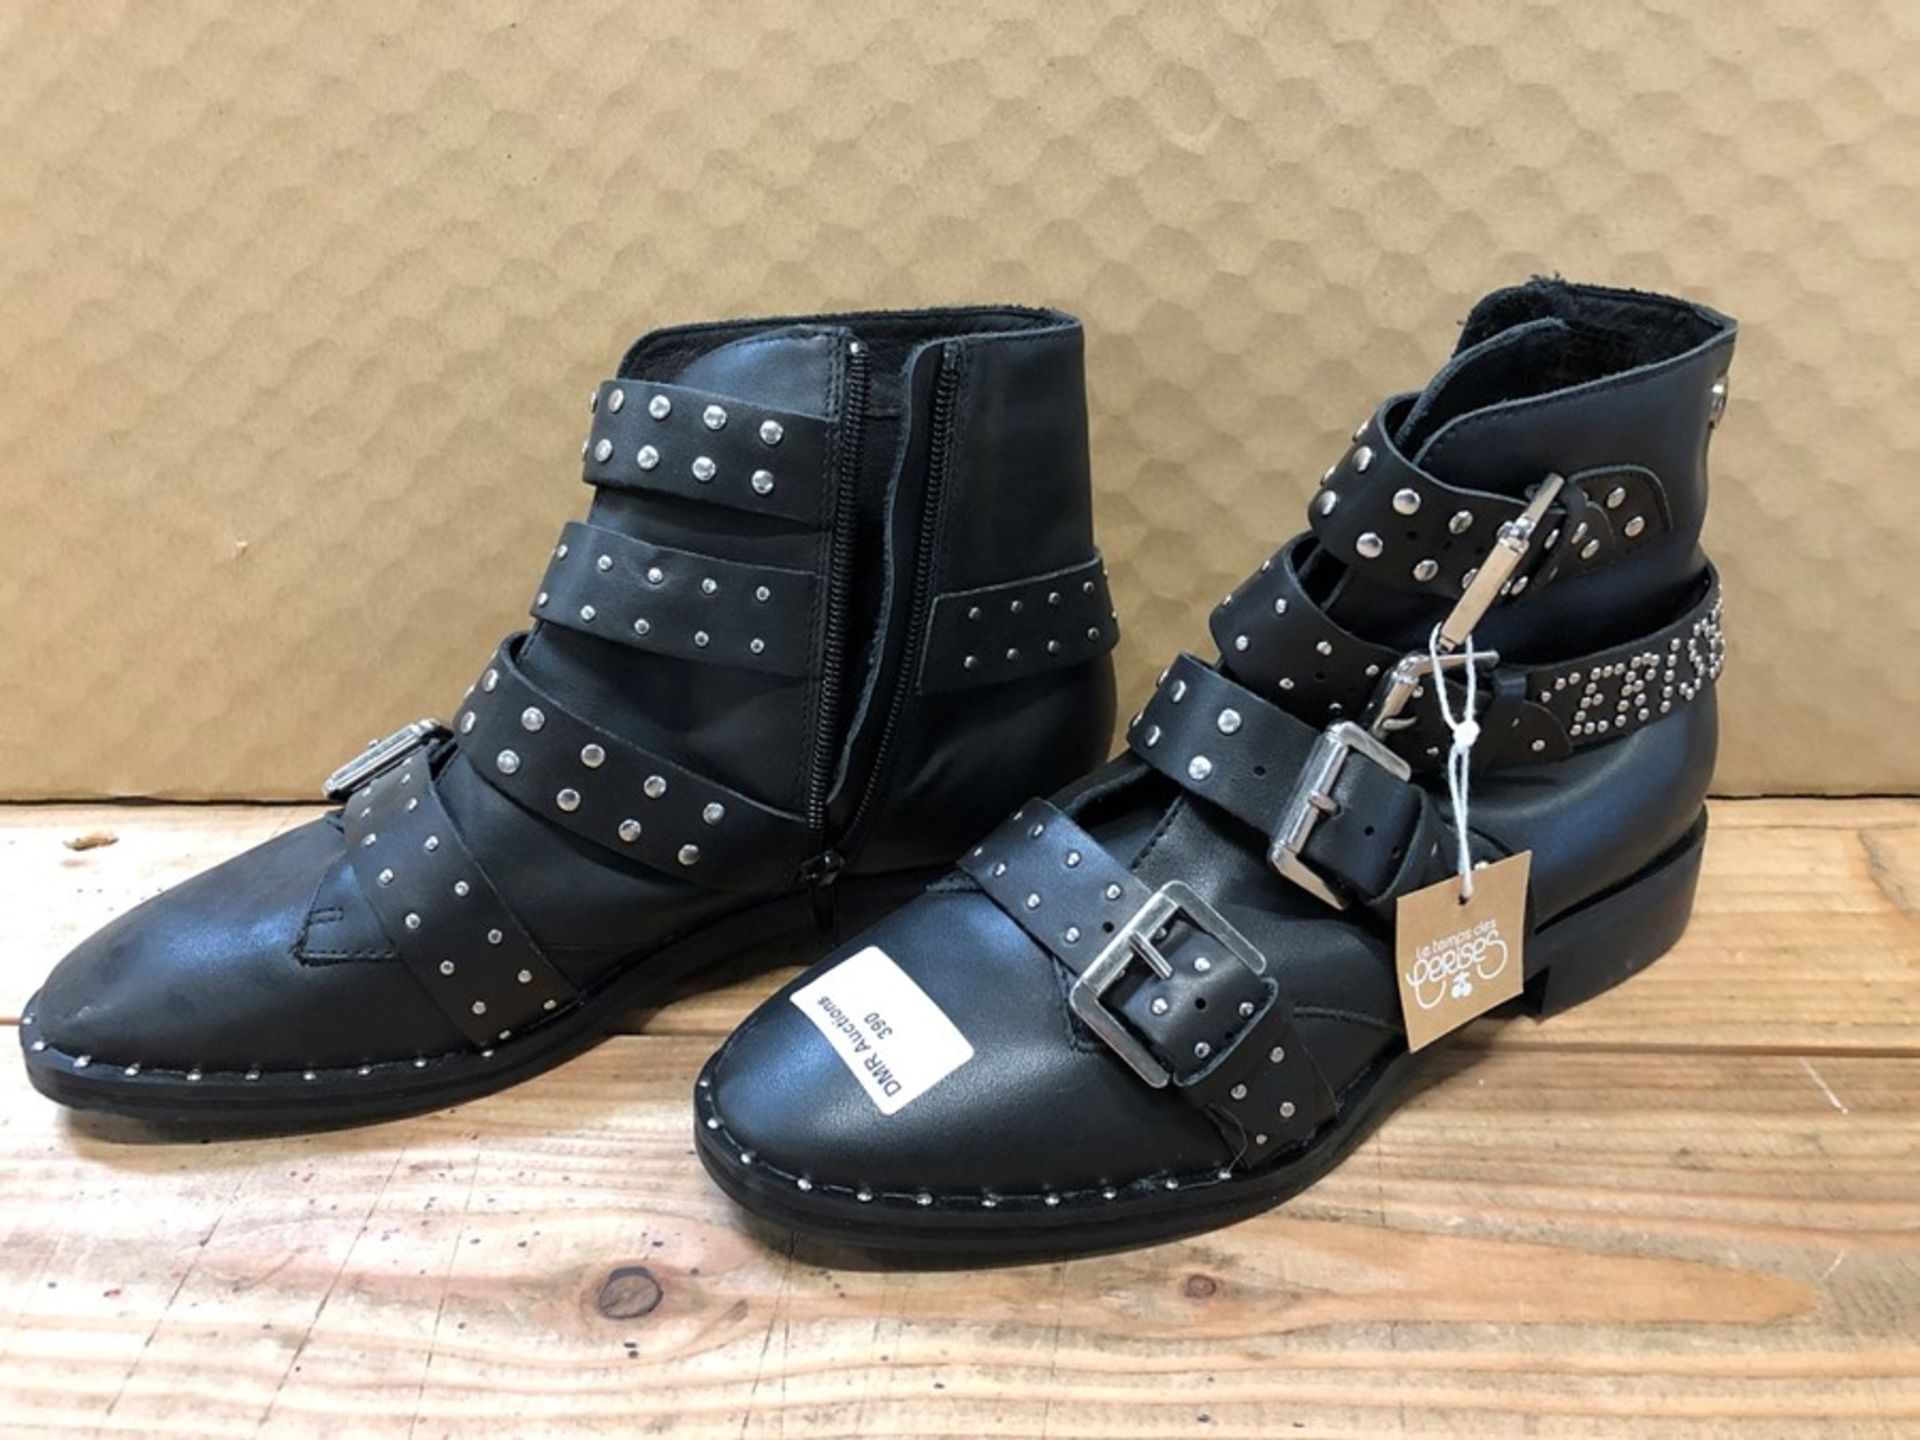 1 LOT TO CONTAIN 1 PAIR CERISES IZY ANKLE BOOTS WITH STUDDED BUCKLED STRAPS IN BLACK / LADIES SIZE